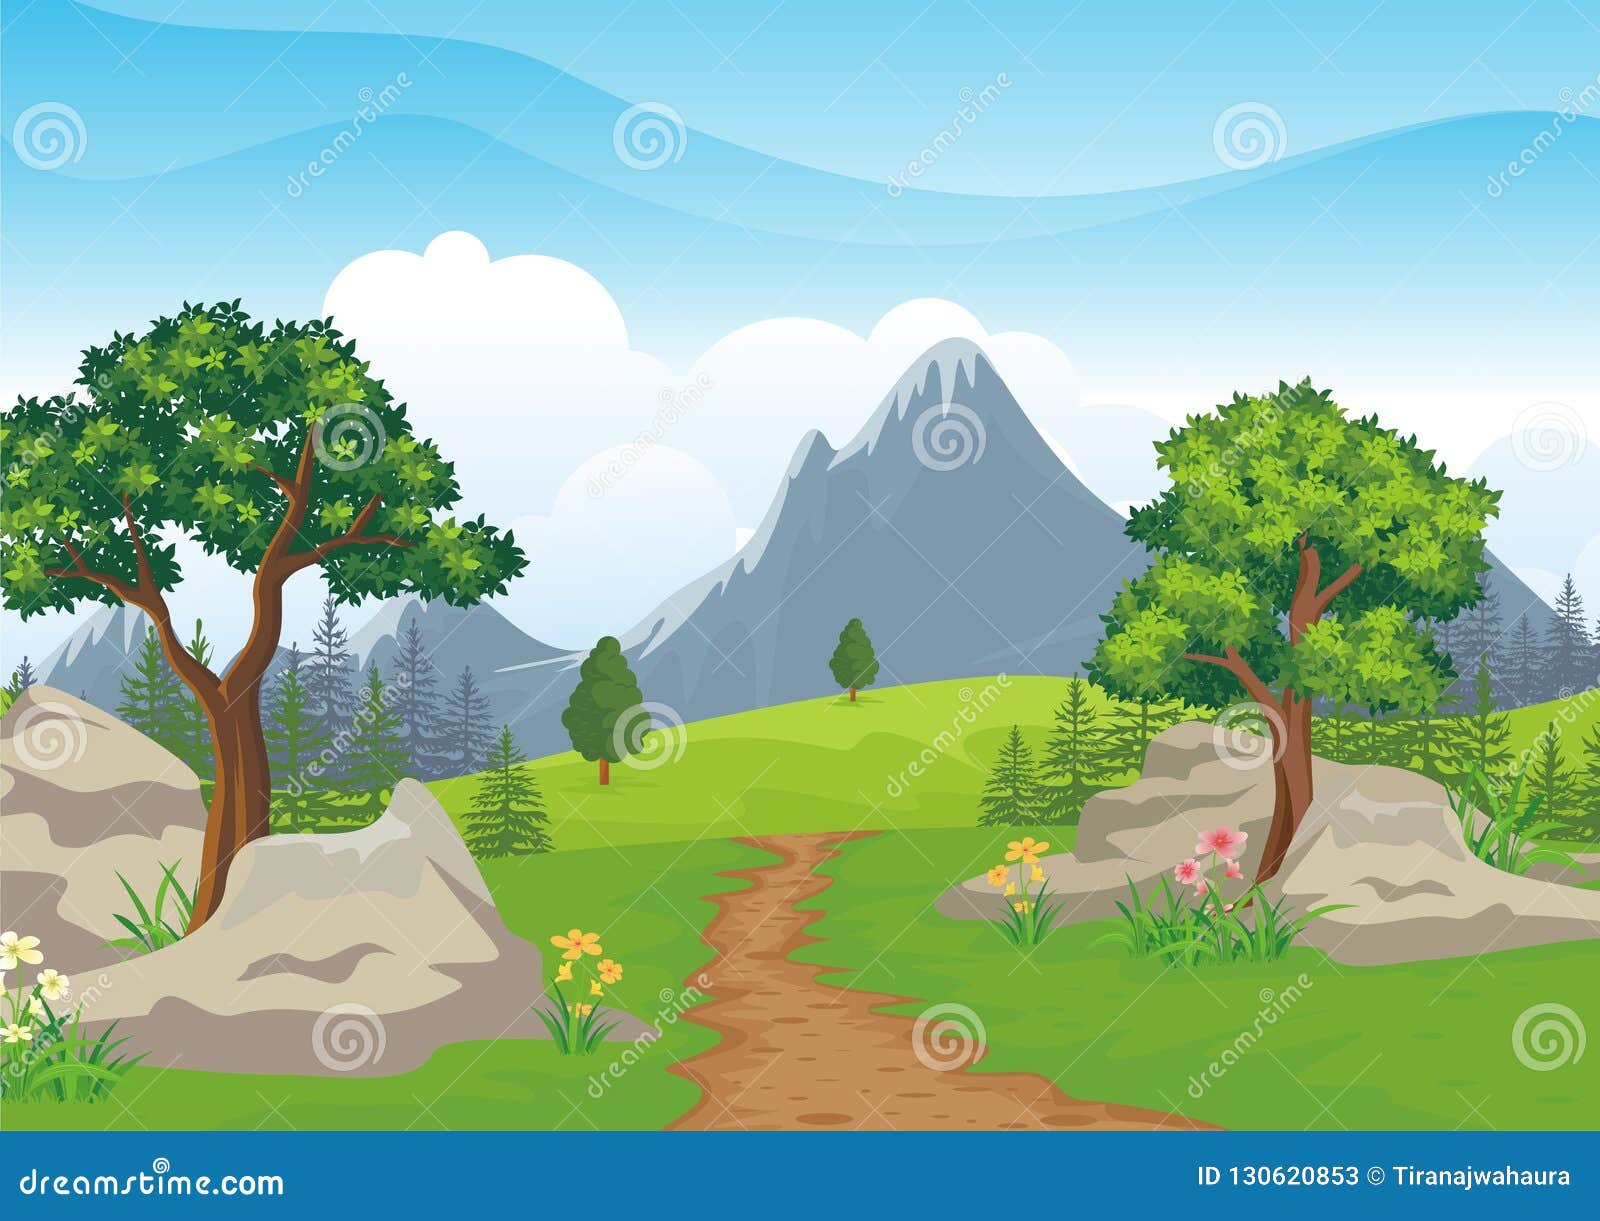 Landscape with Rocky Hill, Lovely and Cute Scenery Cartoon Design ...